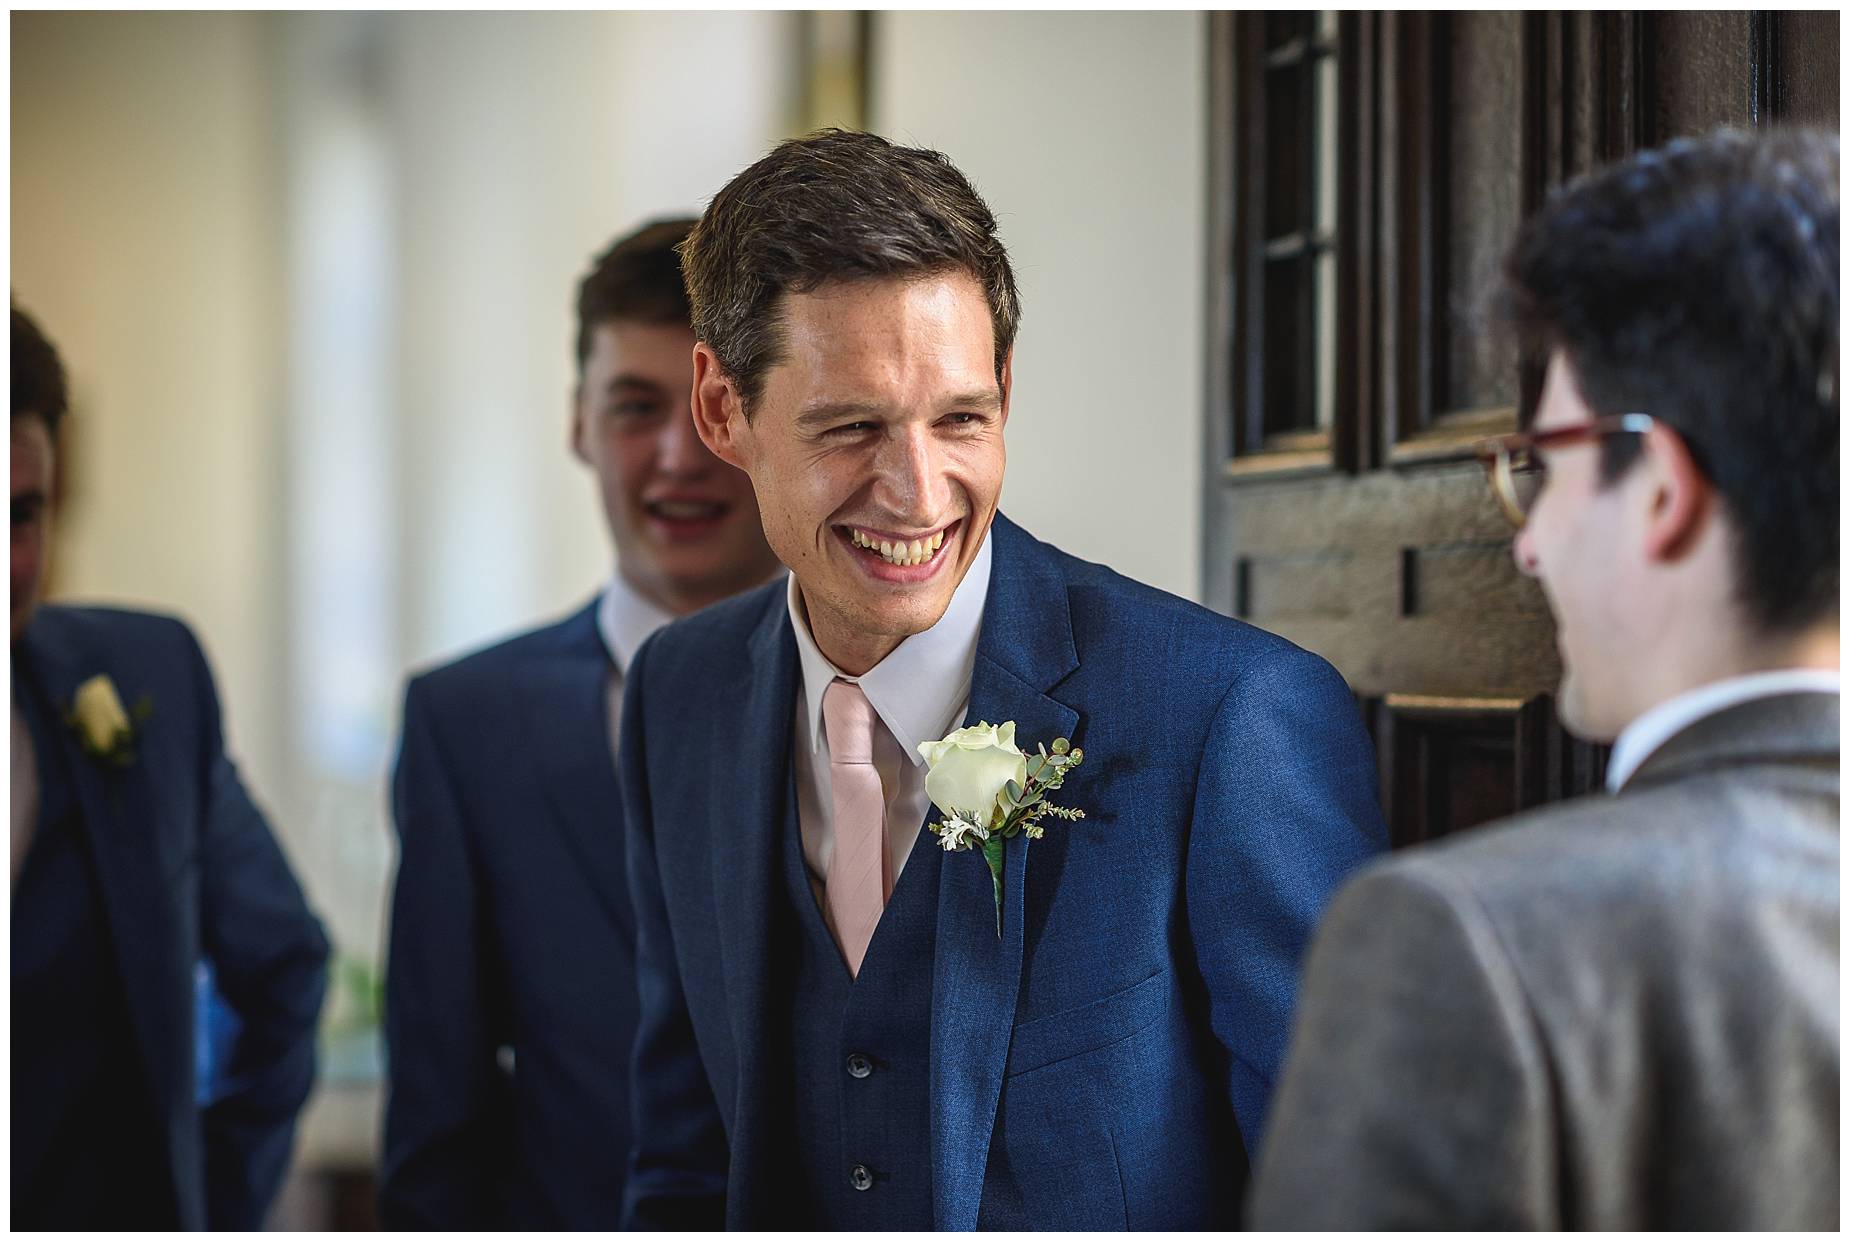 The groom laughing